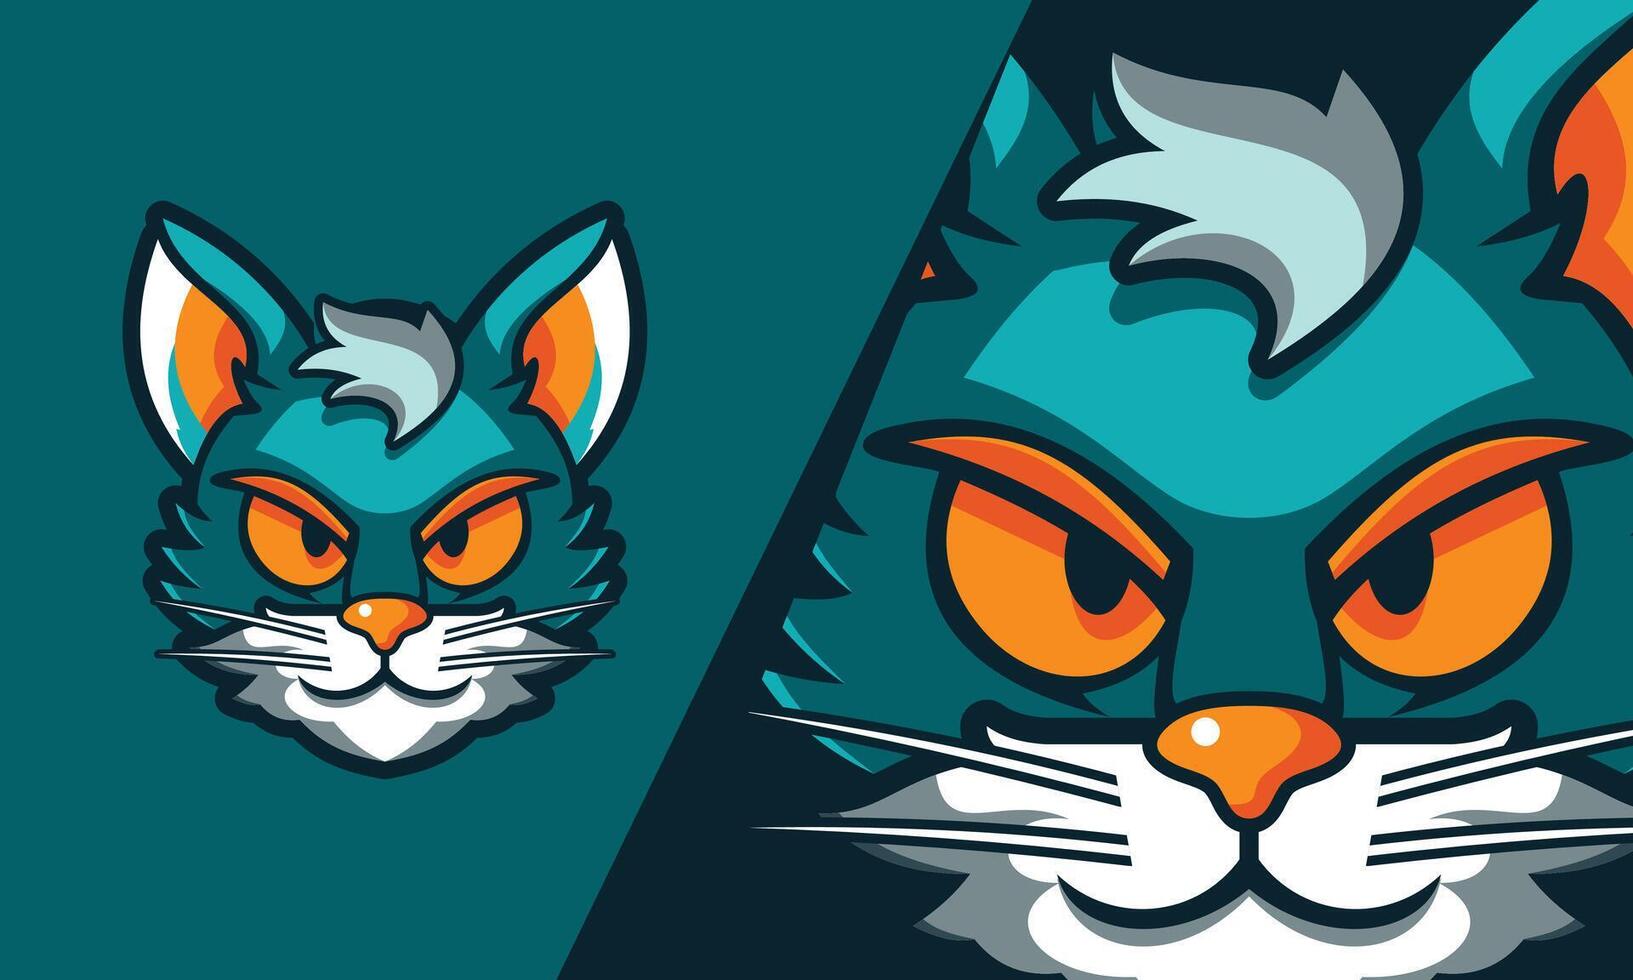 angry vector cat head, orange blue color on blue background suitable for logo, esport, web etc.